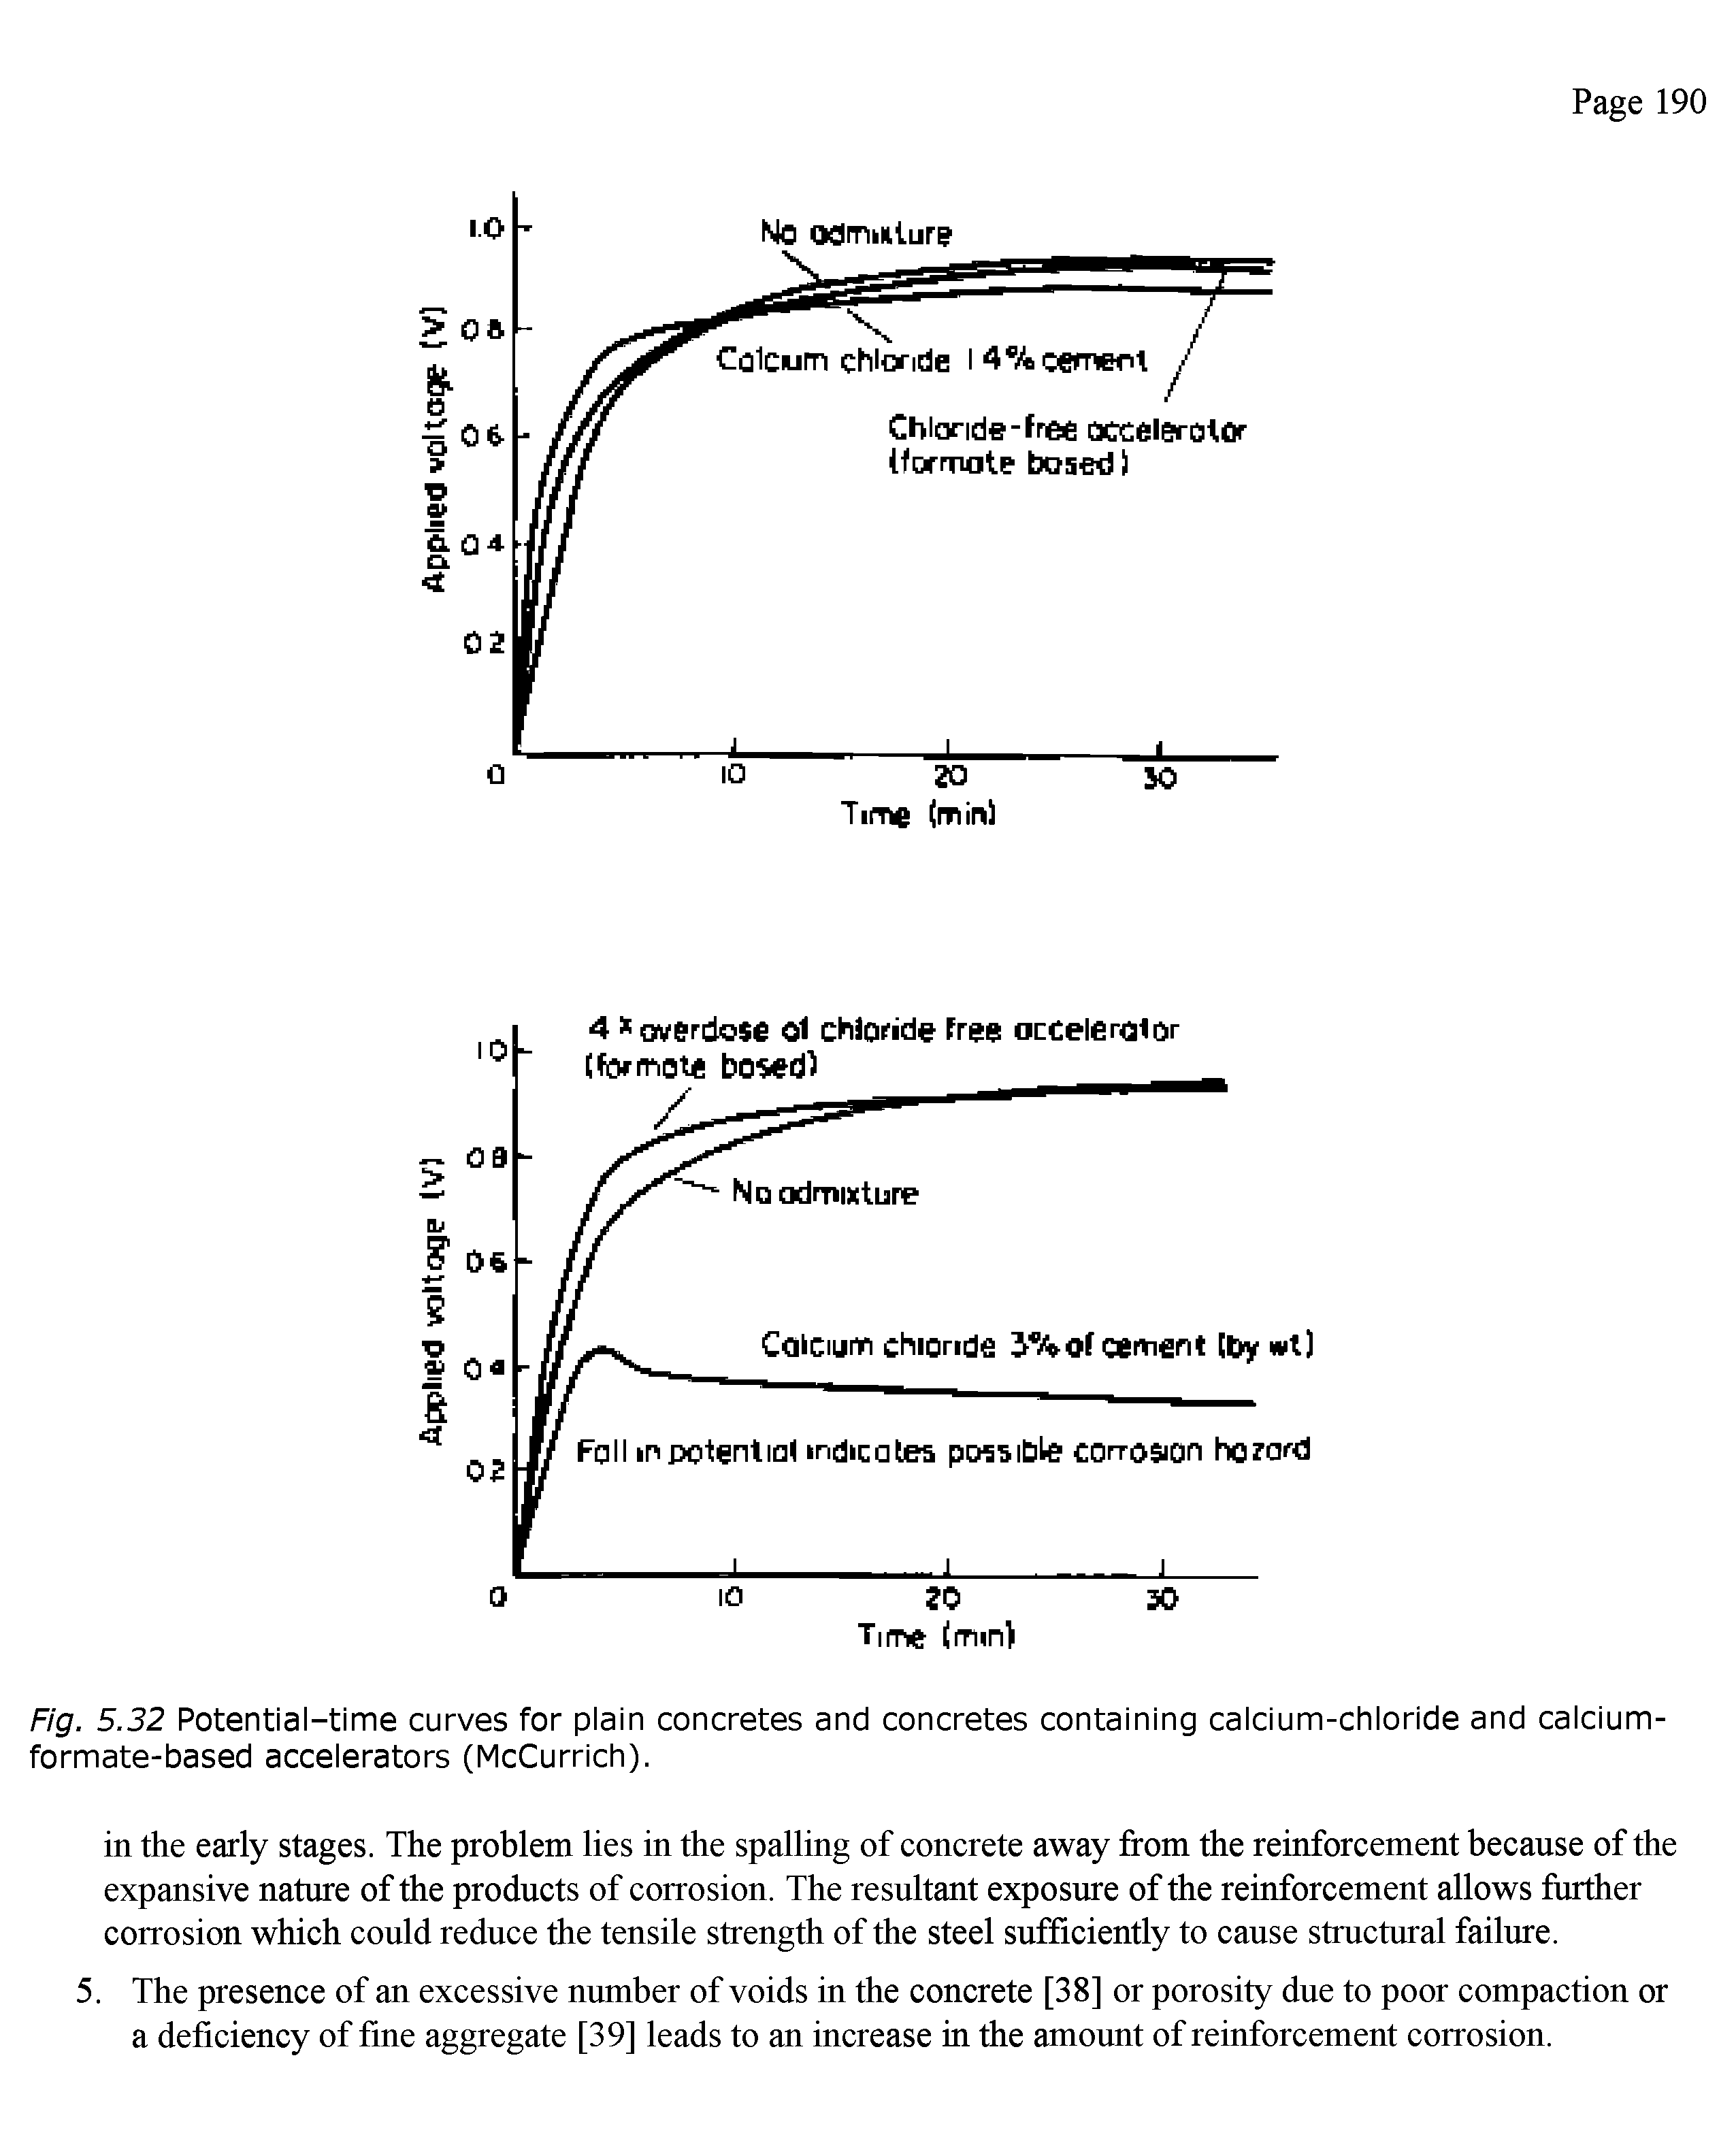 Fig. 5.32 Potential-time curves for plain concretes and concretes containing calcium-chloride and calcium-formate-based accelerators (McCurrich).